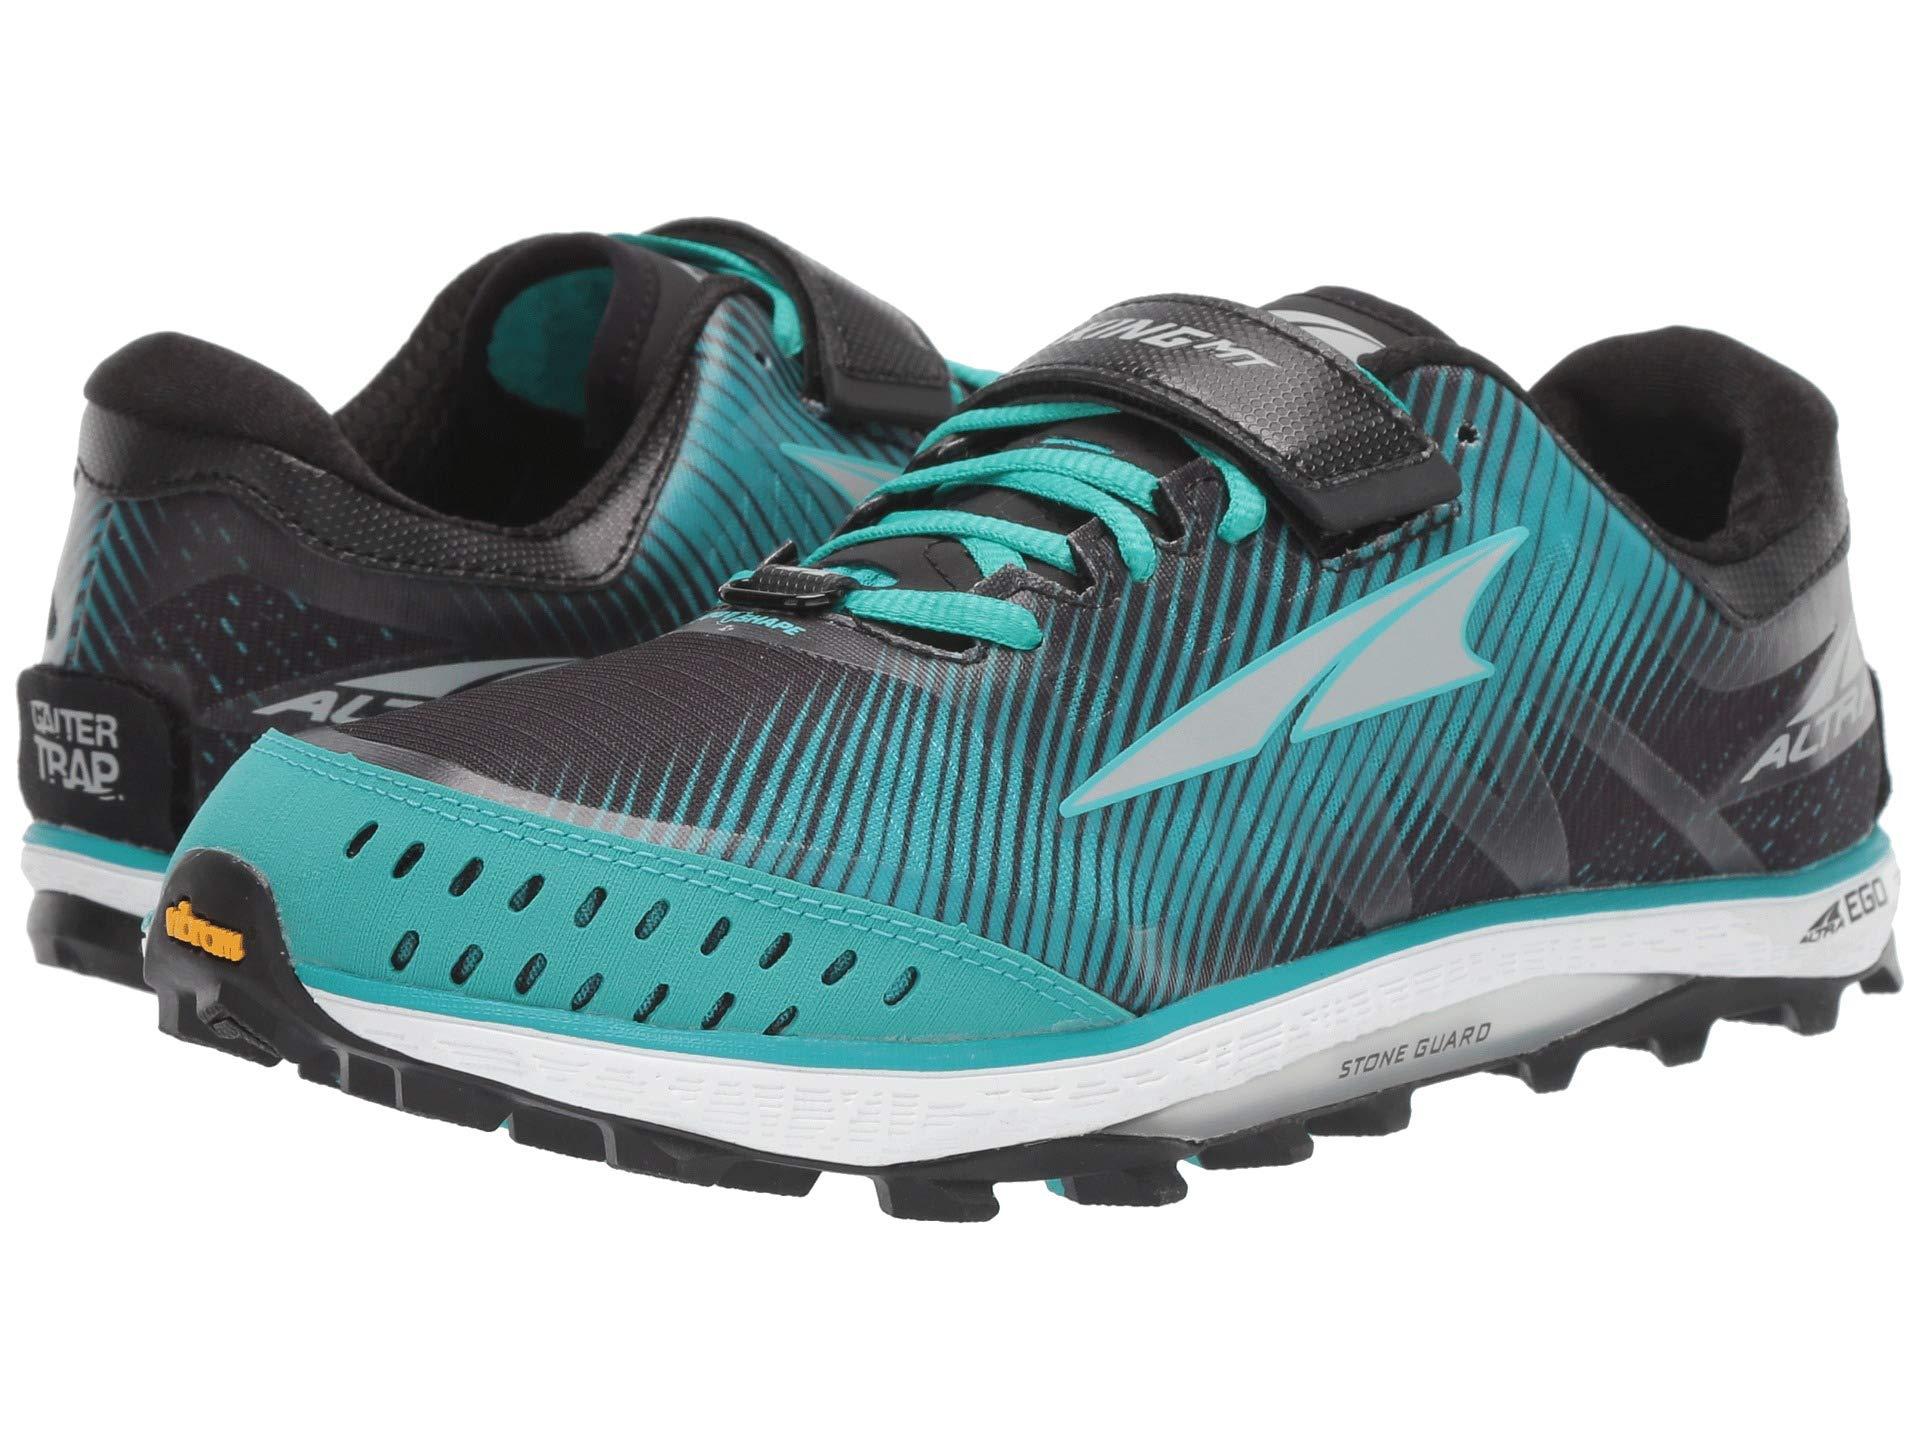 Altra Rubber King Mt 2 in Blue - Lyst